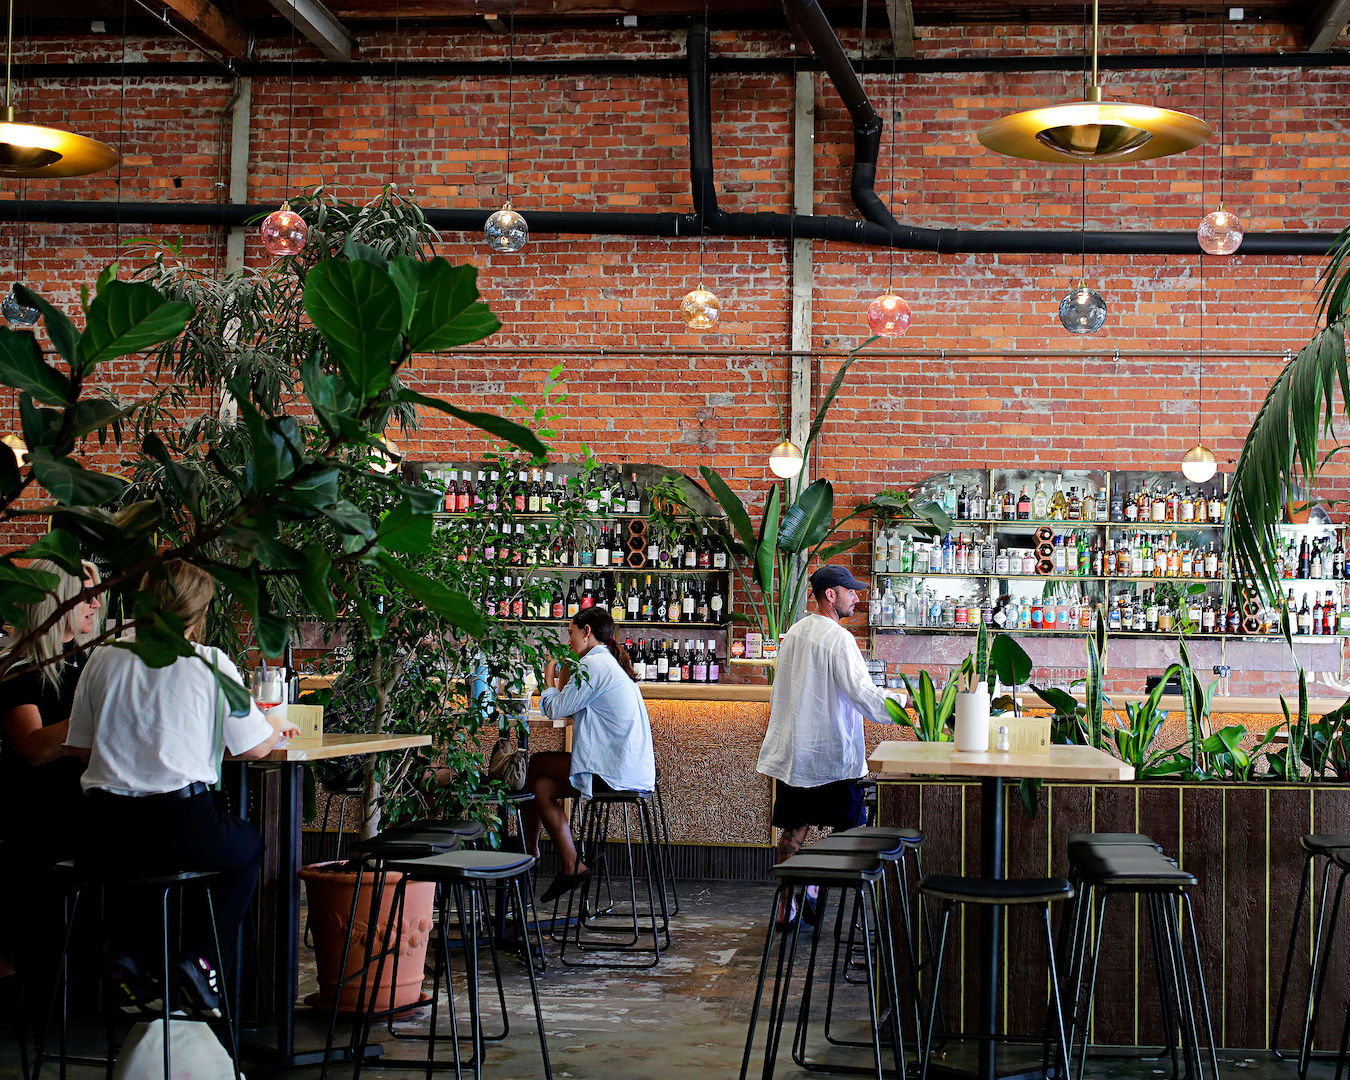 An urban winery filled with plants